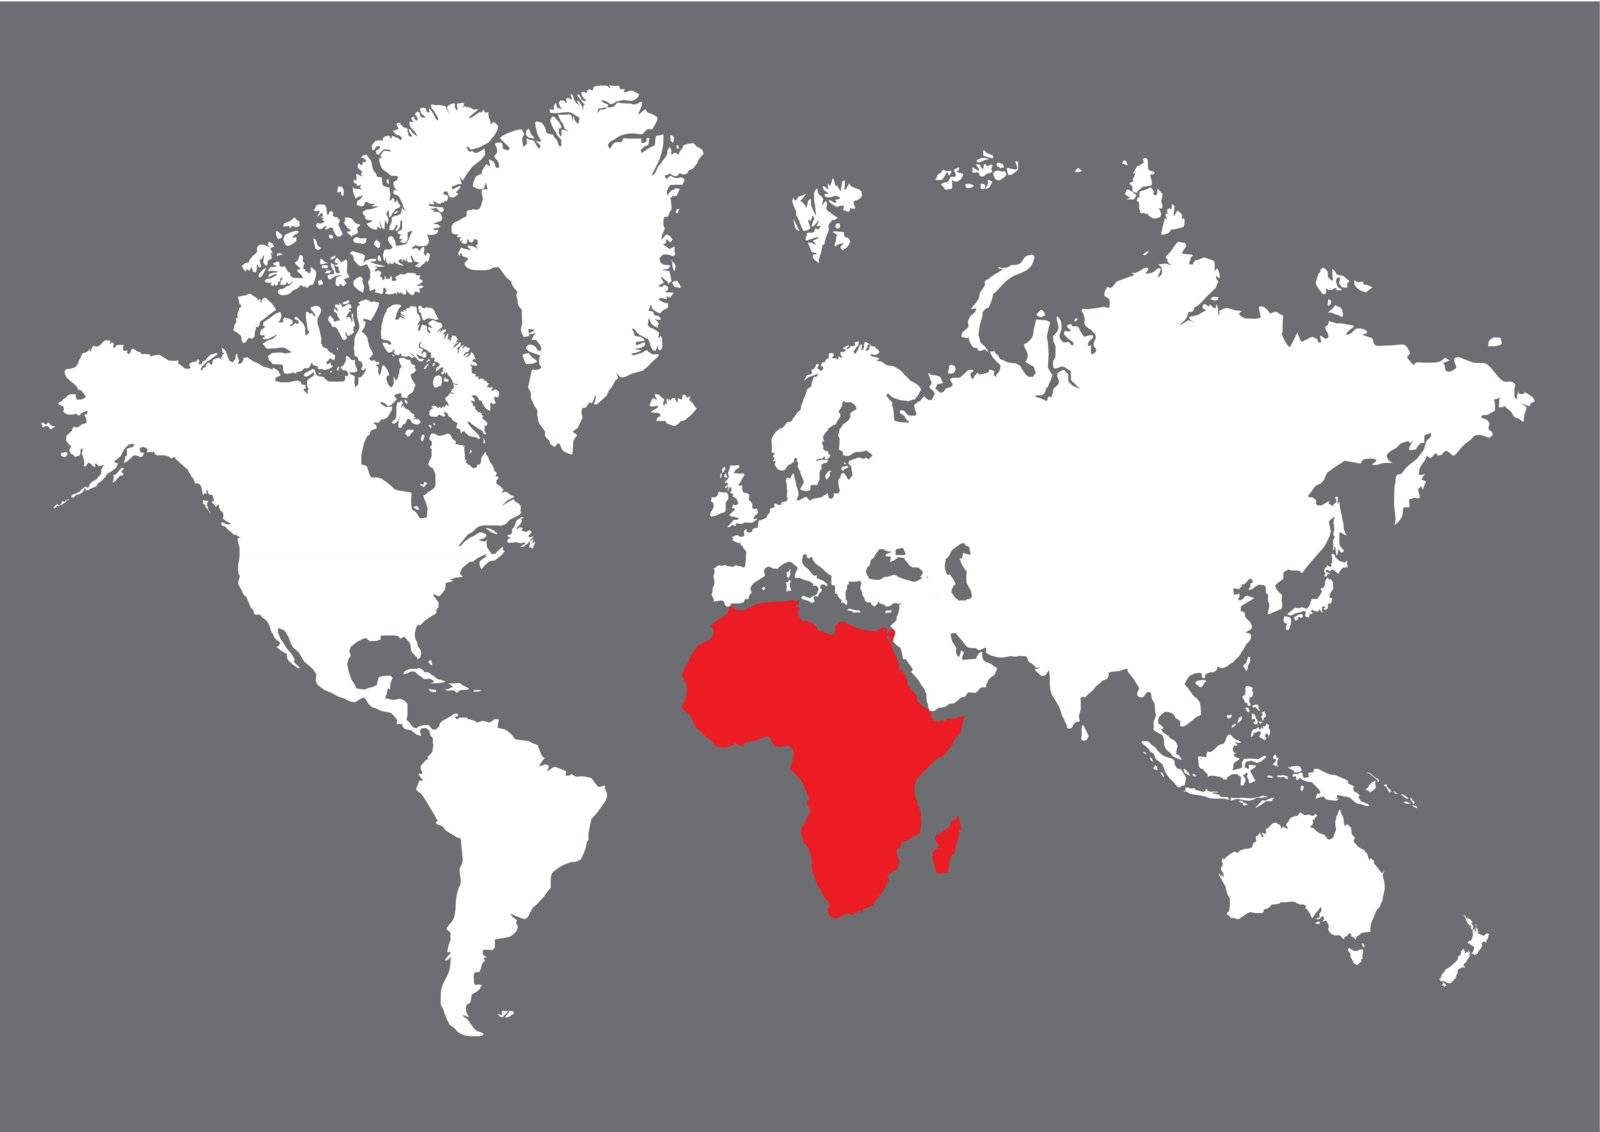 The outline of Africa on the world map labeled